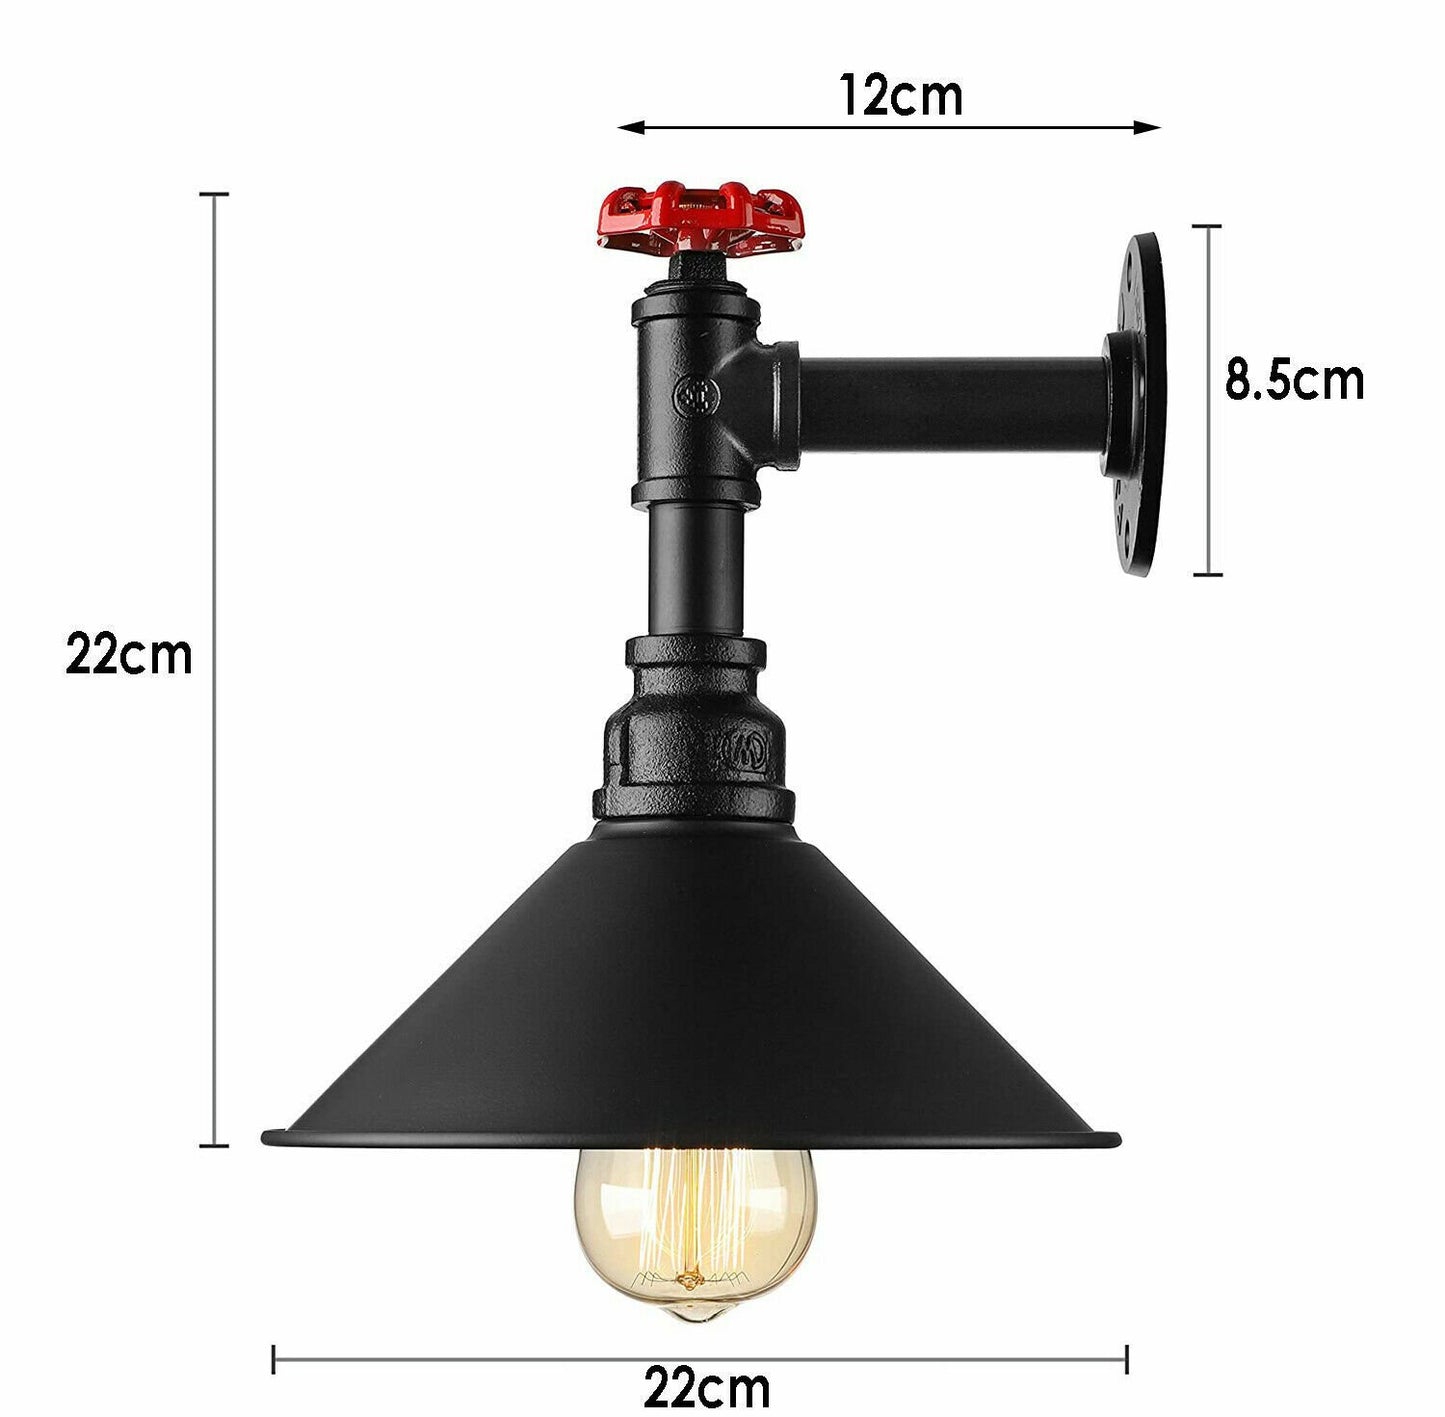 Black Water Pipe  Cone  Wall Sconce Light.JPG